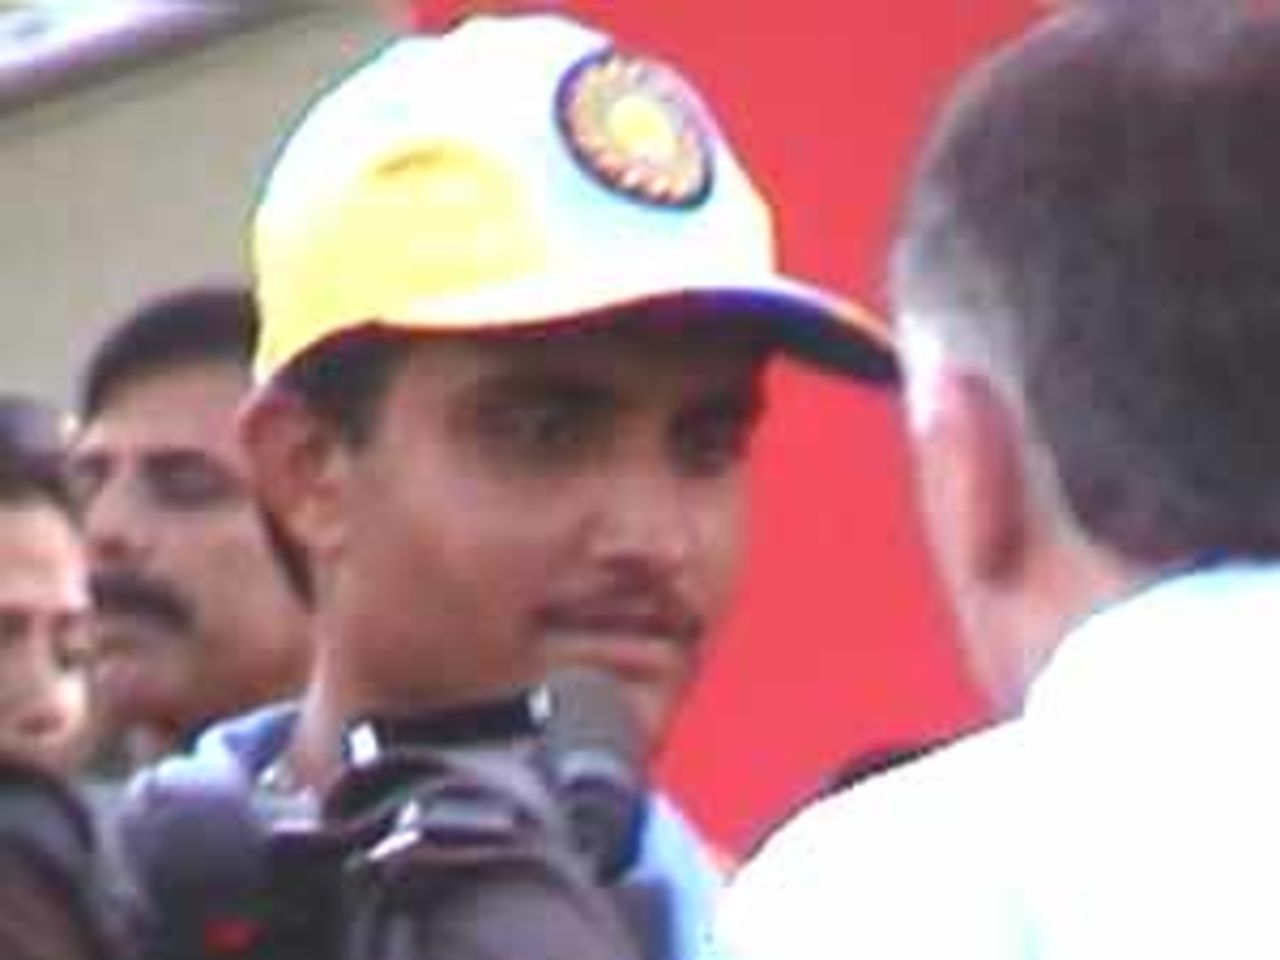 The newly appointed Captain, Saurav Ganguly speaks to Ian Chappell